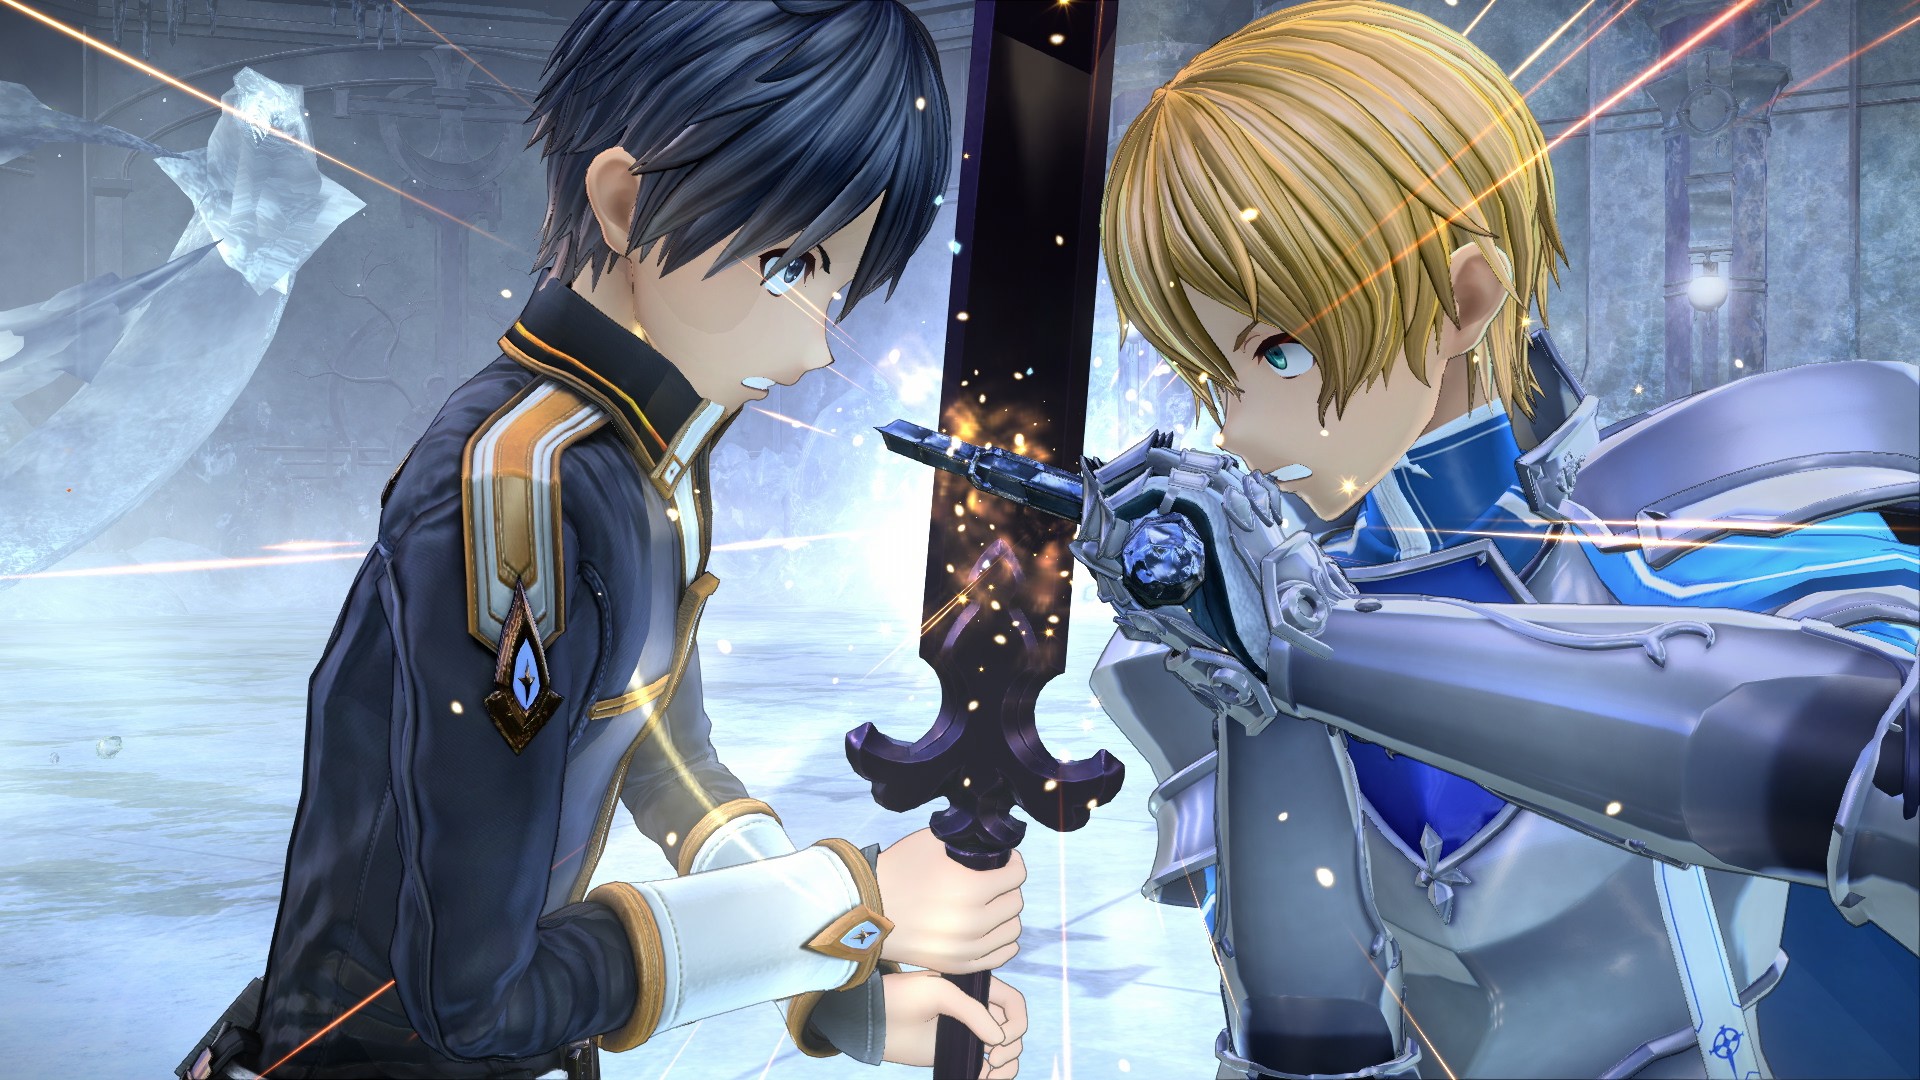 Sword Art Online: Alicization Lycoris, Sword Art Online Alicization Lycoris, PS4, PlayStation 4, Xbox One, XONE, release date, gameplay, features, price, pre-order, tokyo game show 2019, tgs2019, North America, US